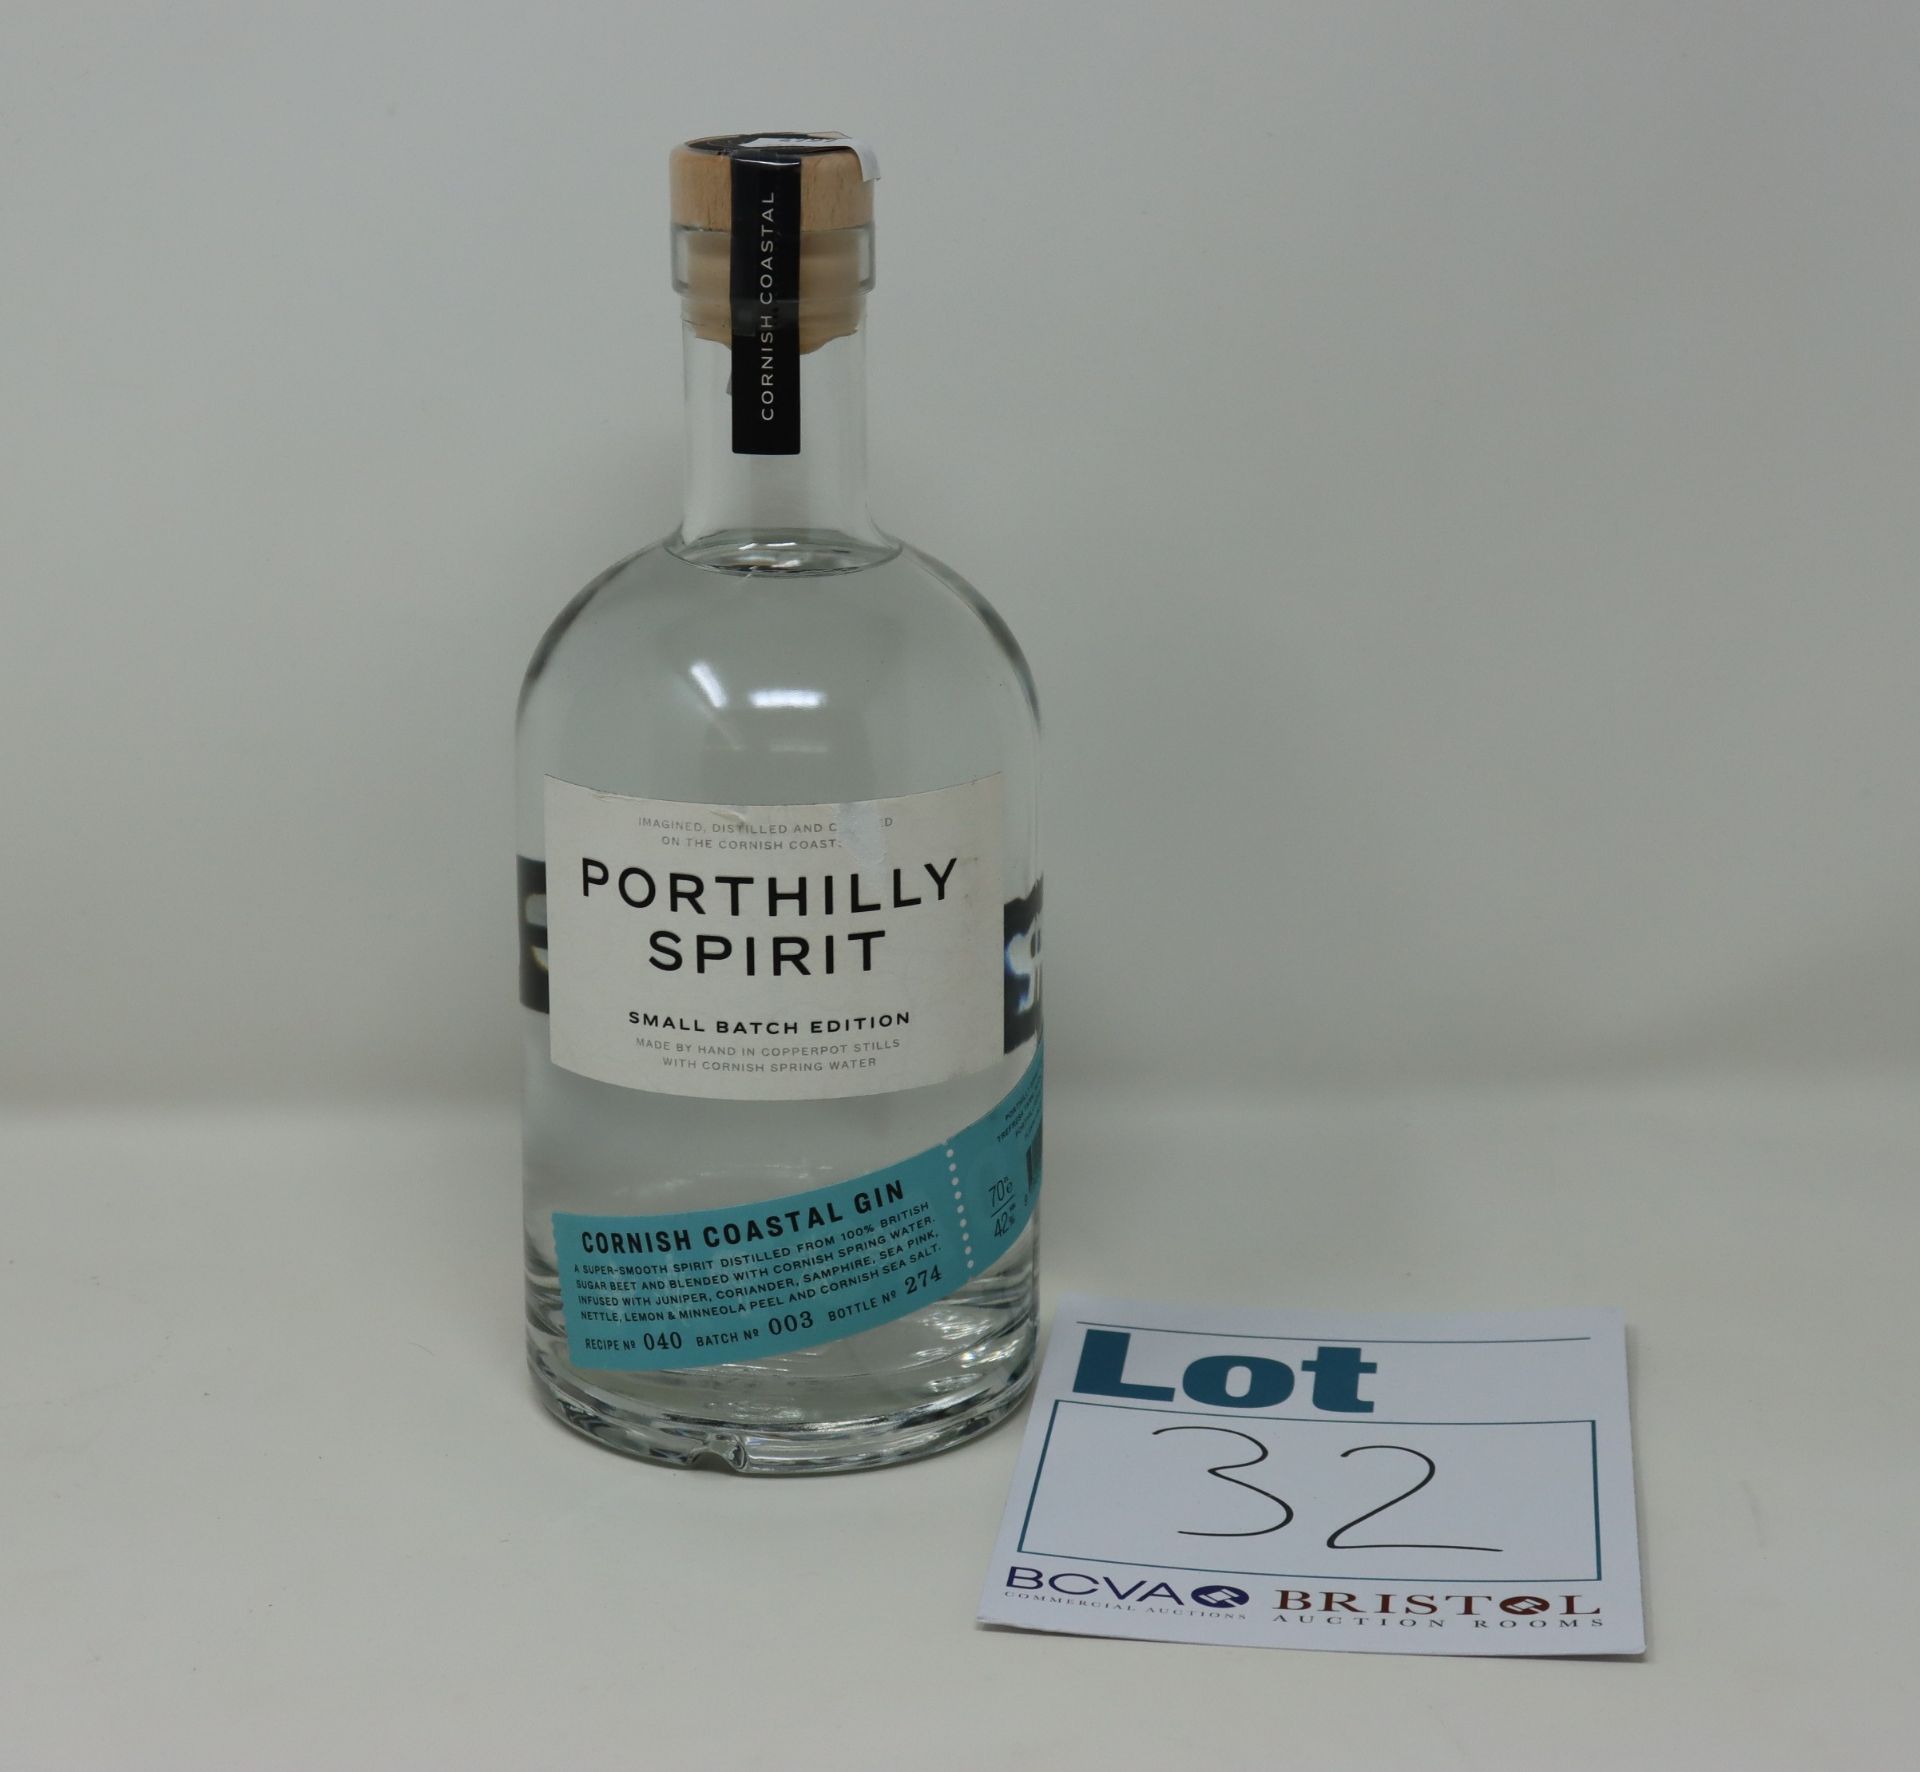 Five bottles of Porthilly Spirit small batch edition Cornish coastal gin (70cl, over 18s only).